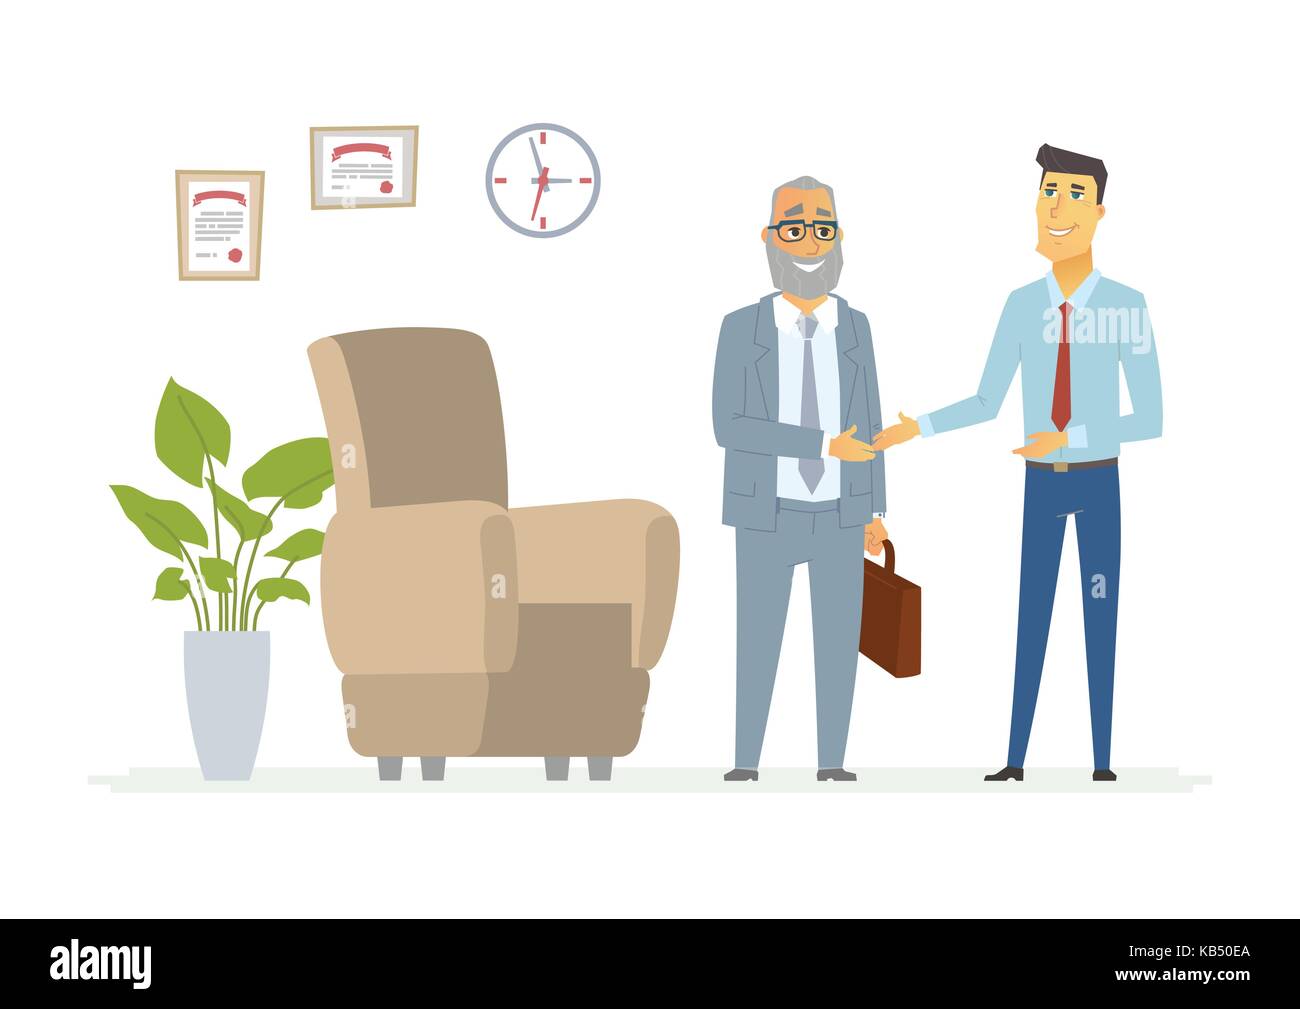 Productive business communication - modern cartoon people characters illustration with a senior boss and a young employee smiling and shaking hands. C Stock Vector